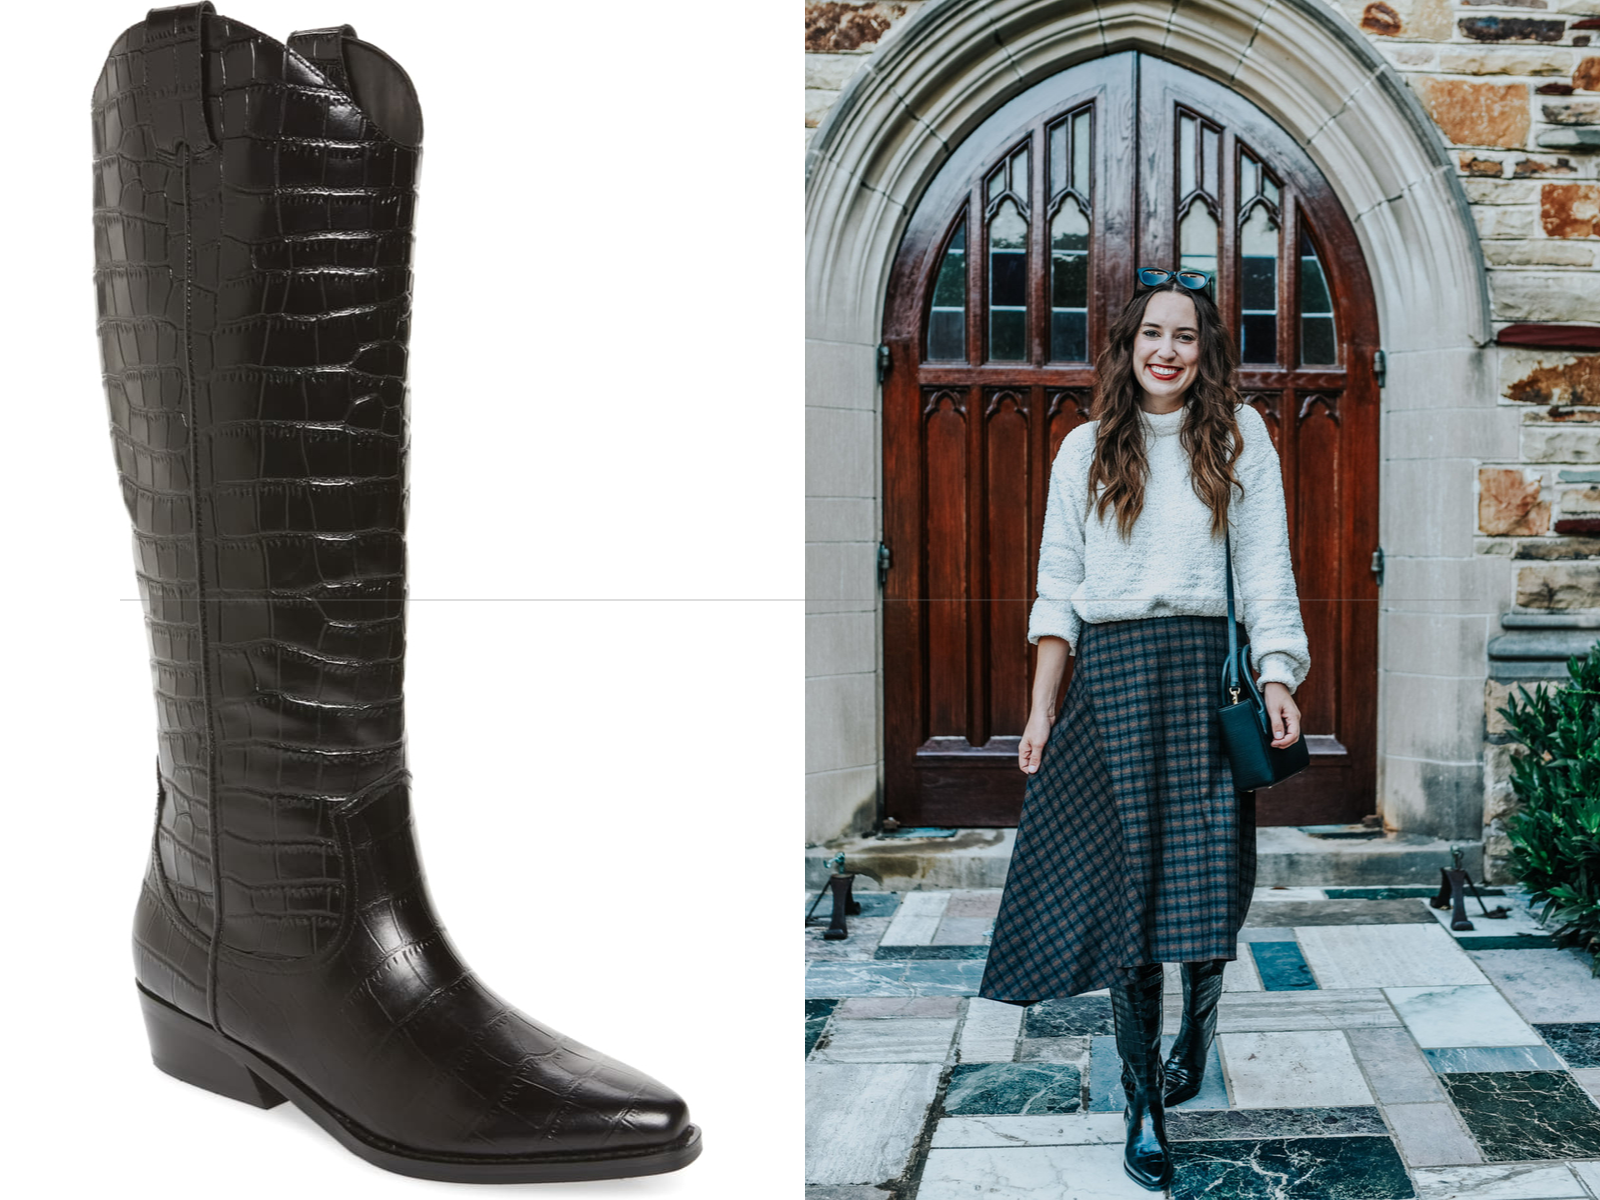 Cute Winter Boot Trends for 2019 featured by top US fashion blog, Lone Star Looking Glass: image of black snake skin boots